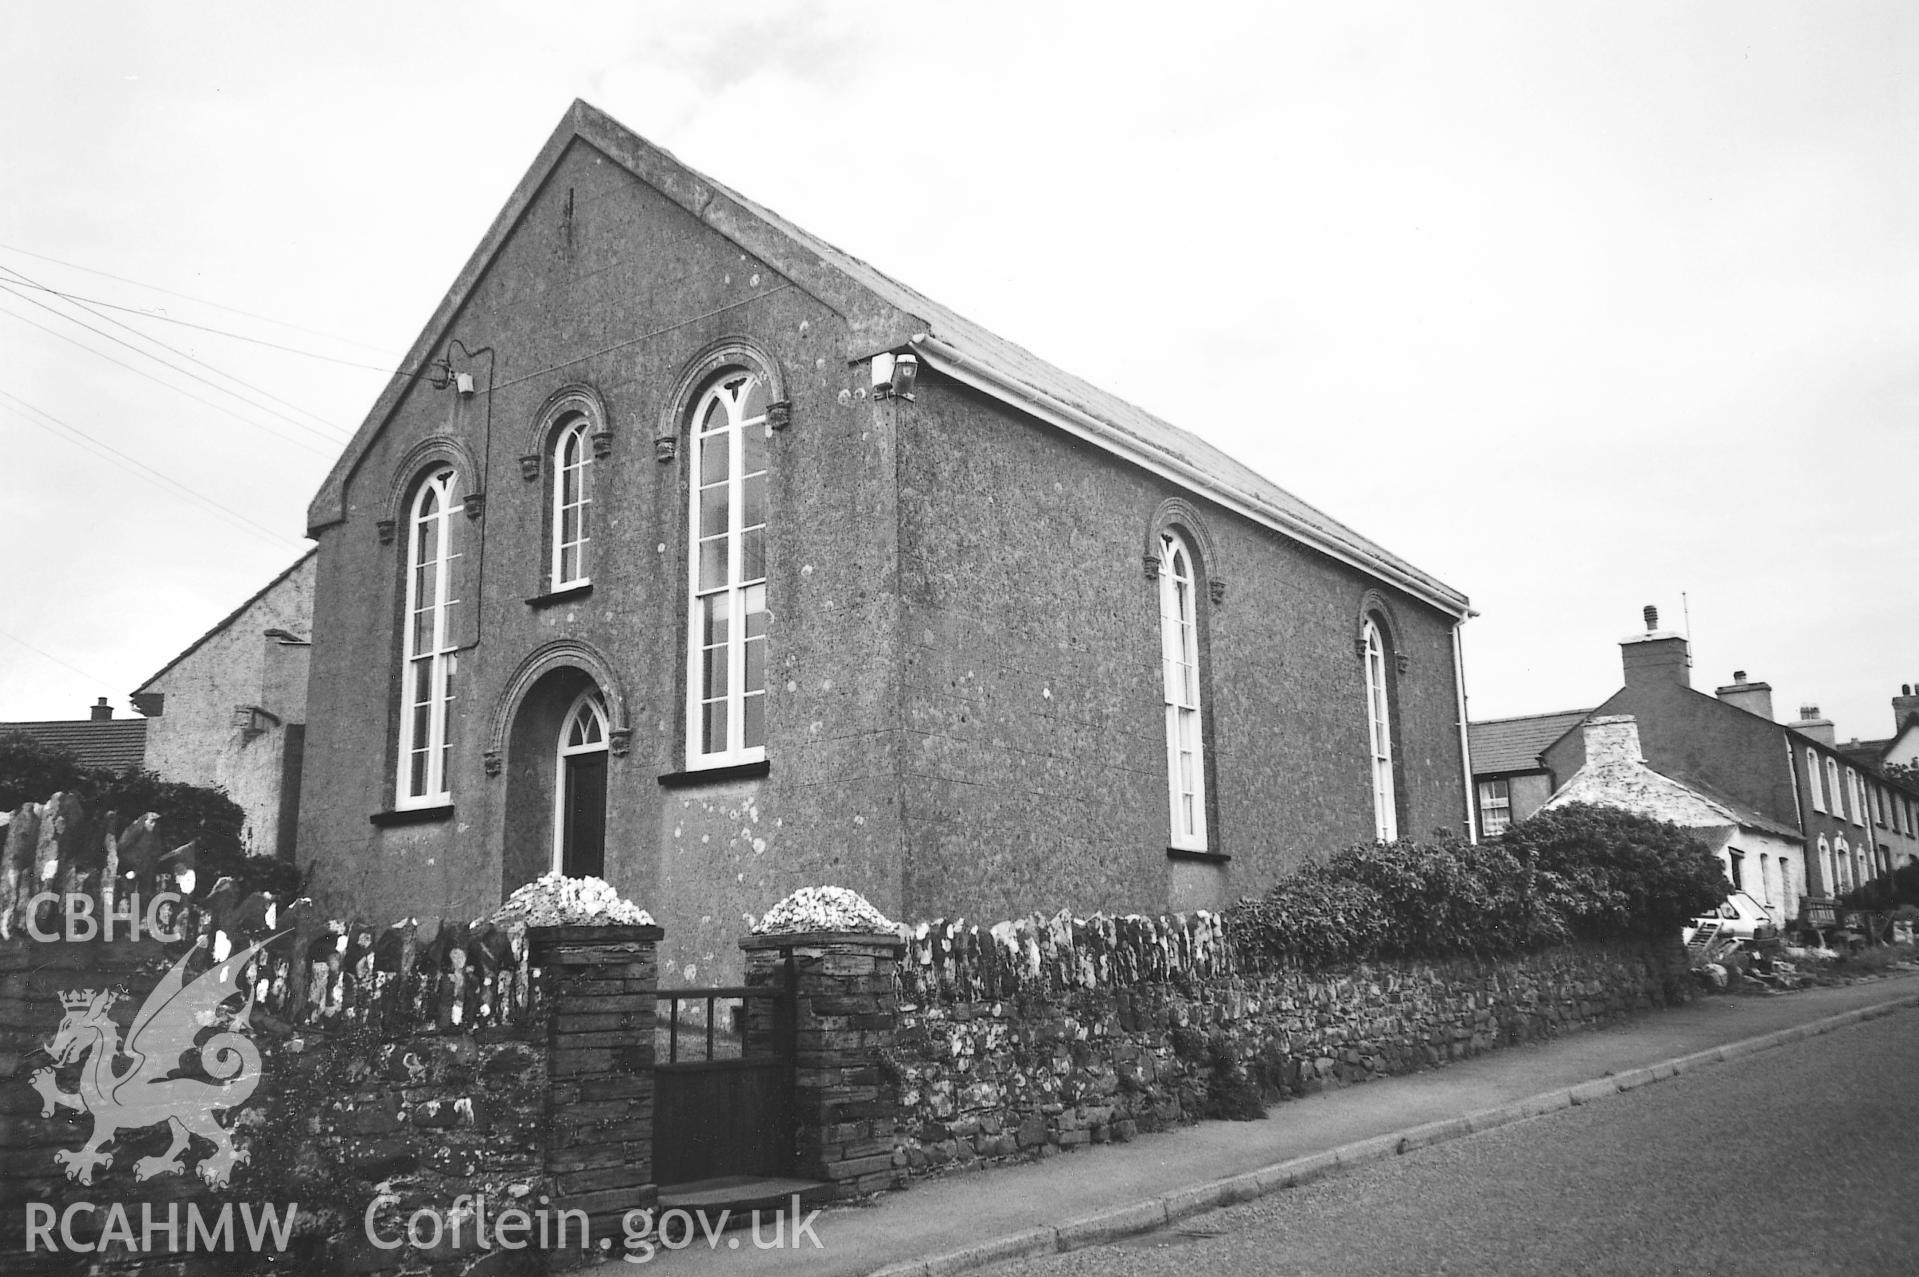 Digital copy of a black and white photograph showing a general view of Elim Baptist Chapel, Trevine, taken by Robert Scourfield, 1995.